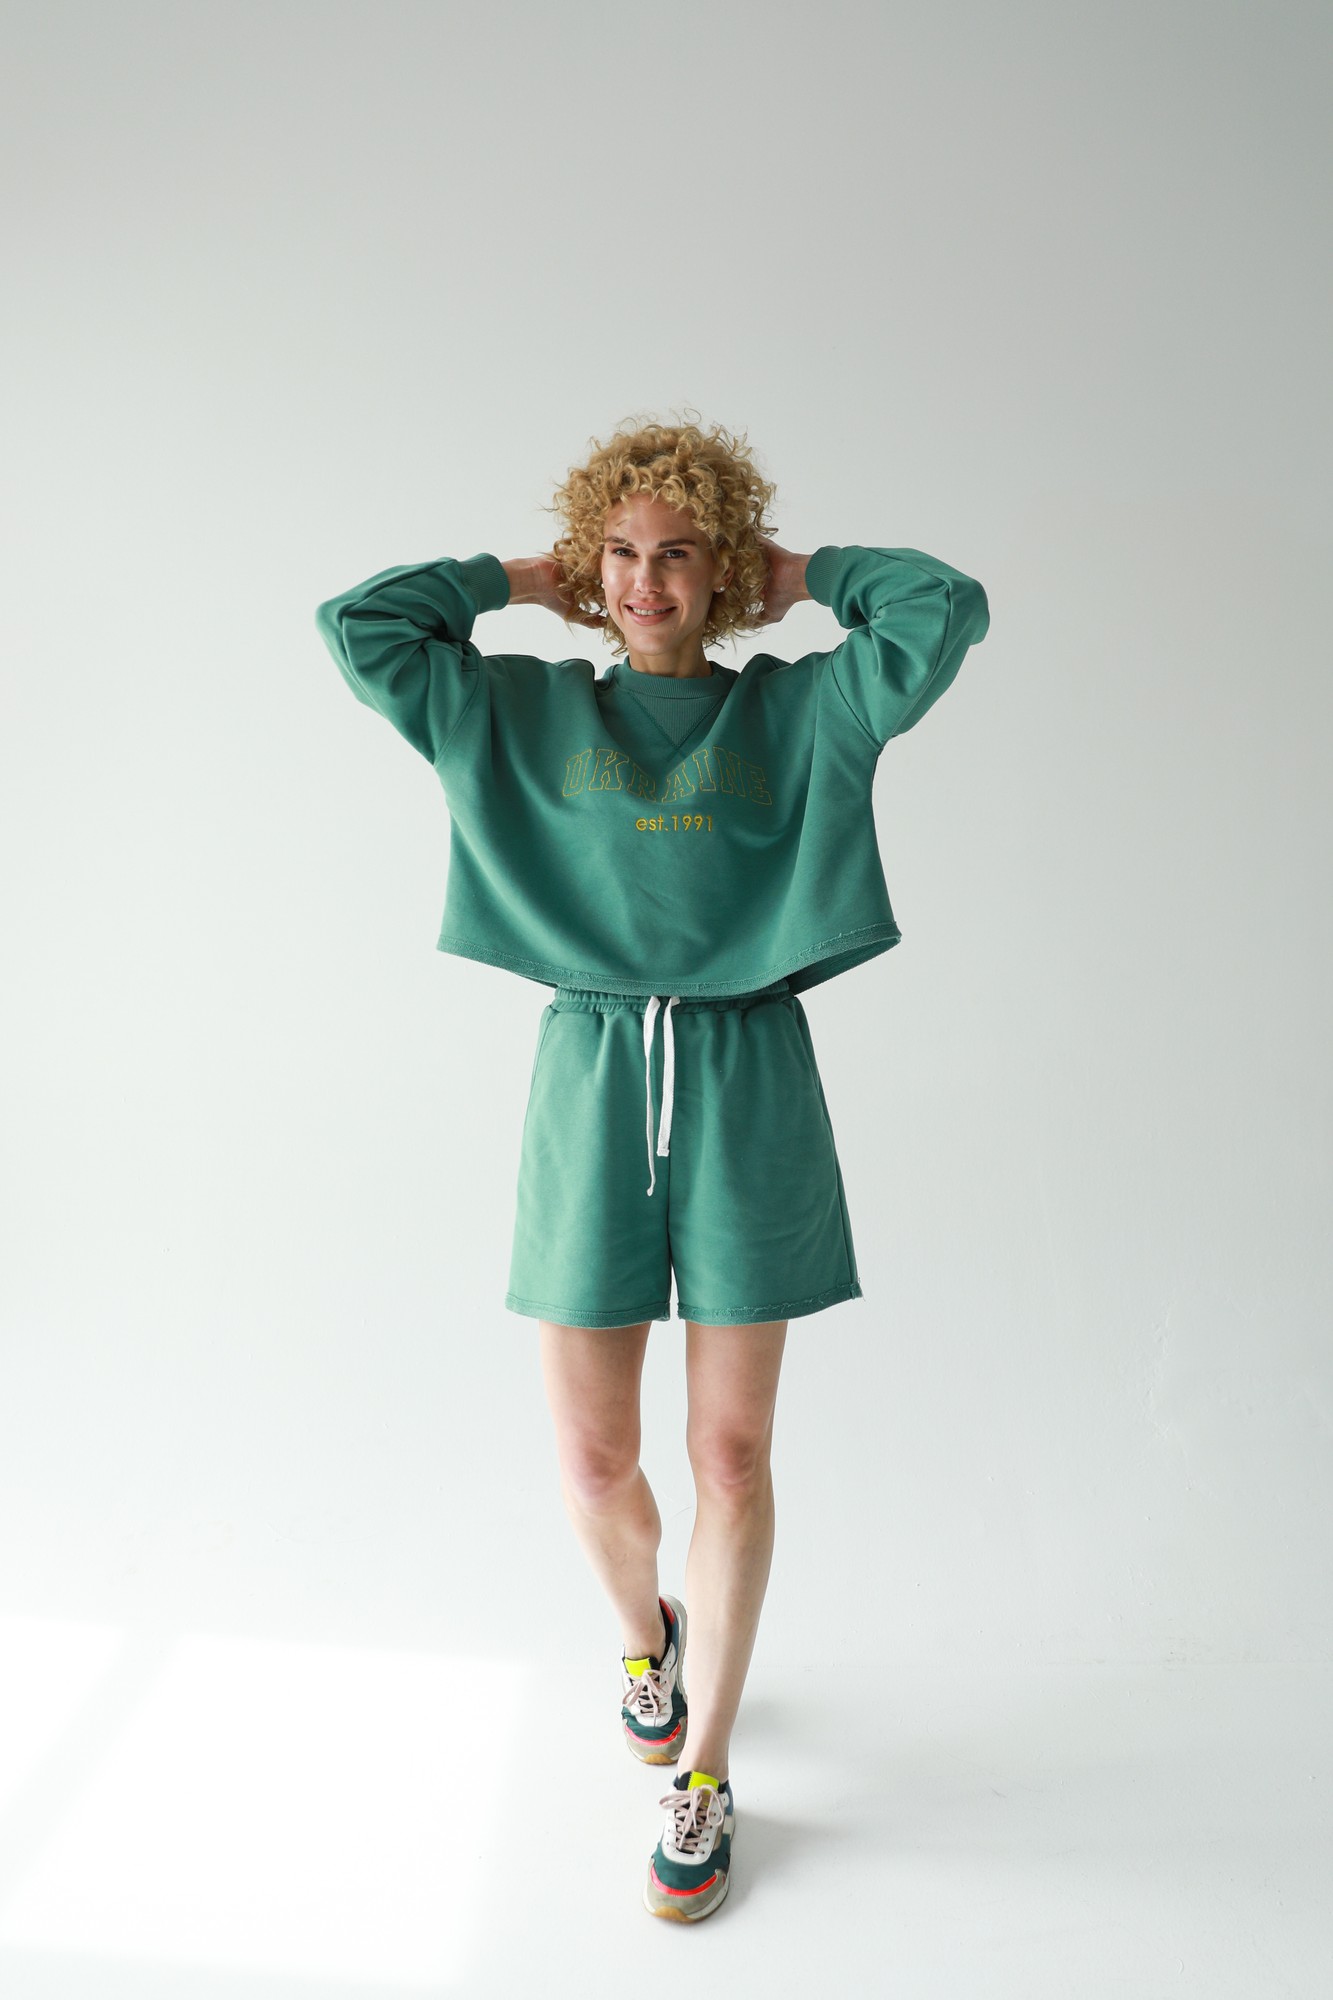 Women's suit with shorts with "Ukraine 1991" embroidery in emerald color